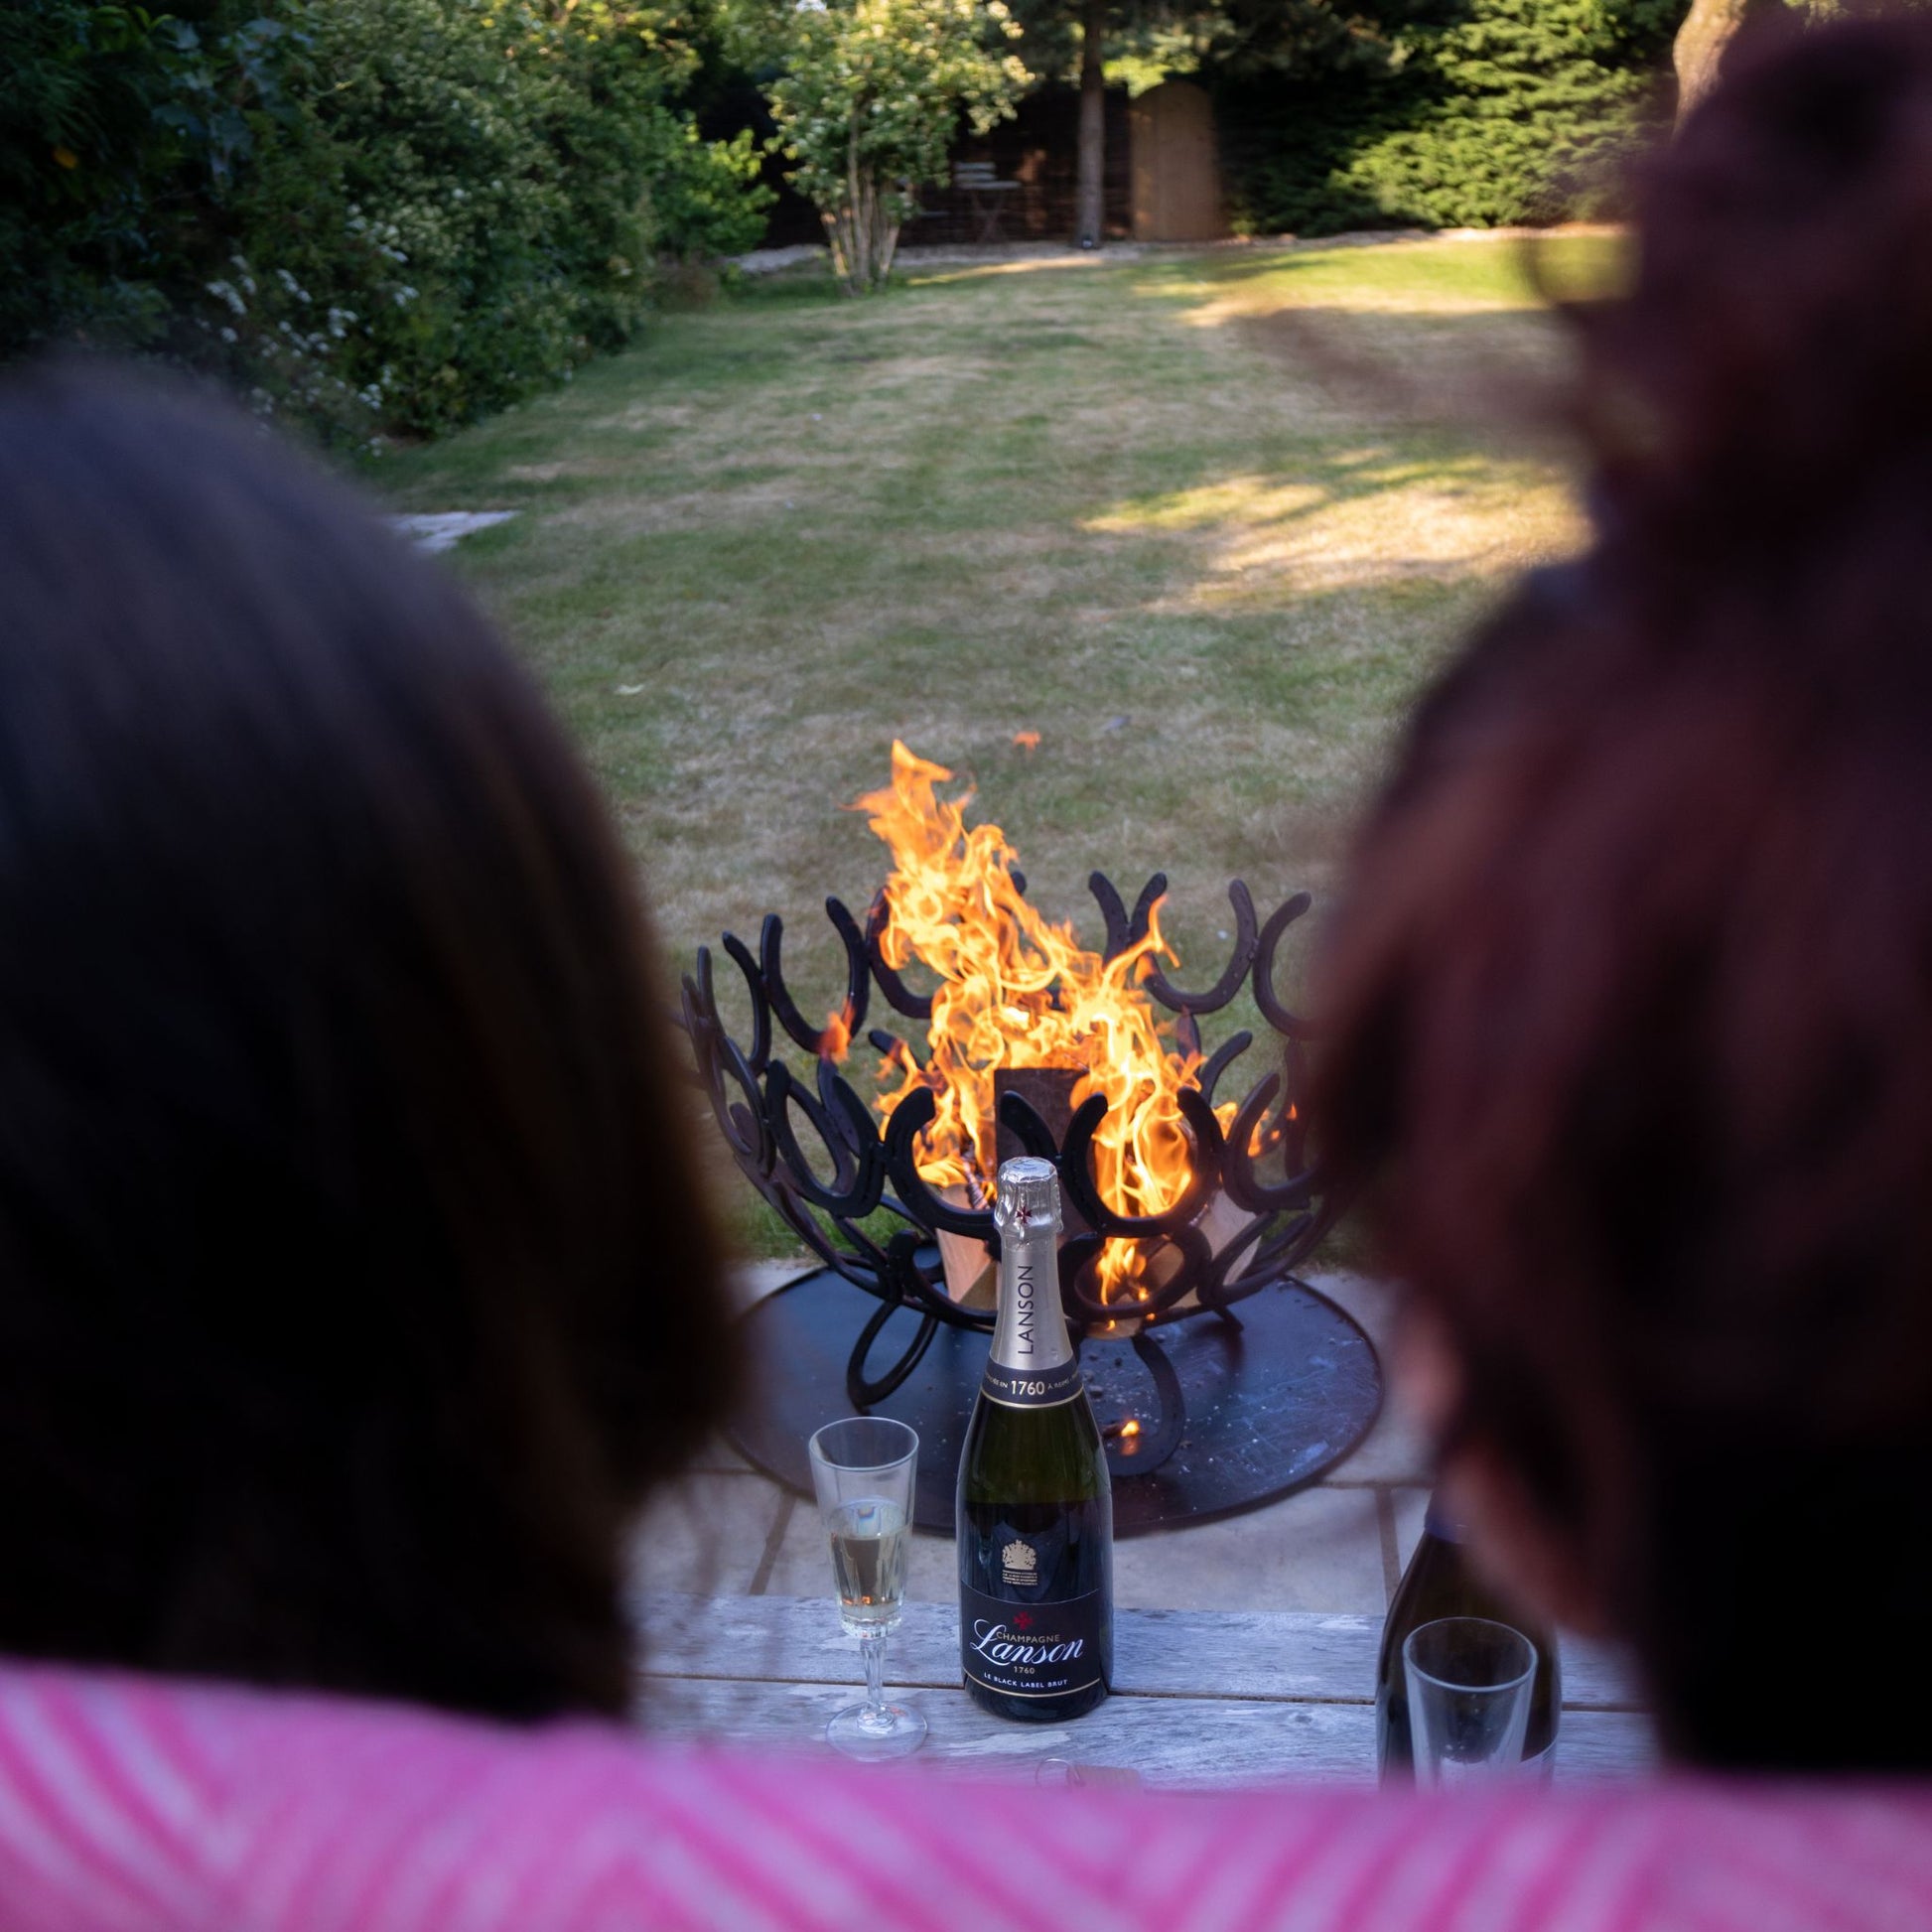 Two women sat in front of a fire in a handmade horseshoe fire pit in a country garden.